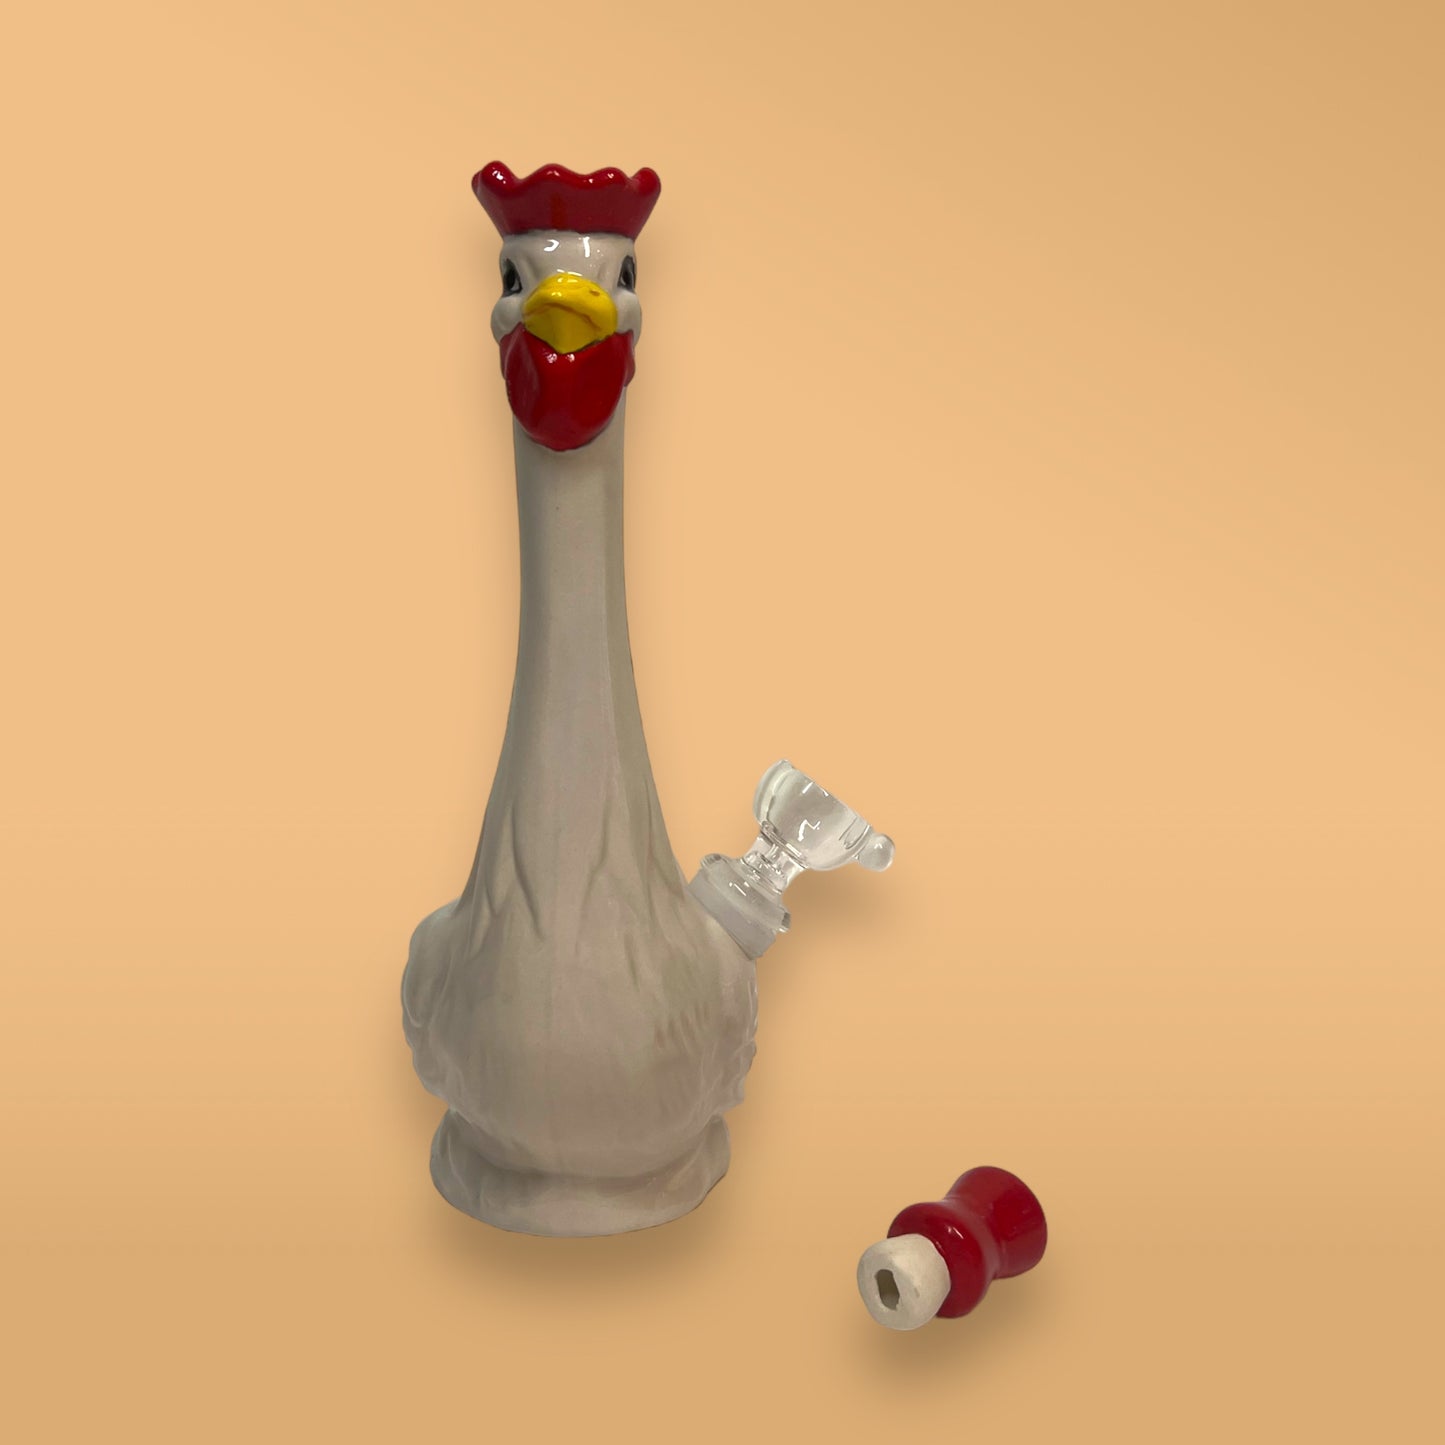 Kitschy Rooster